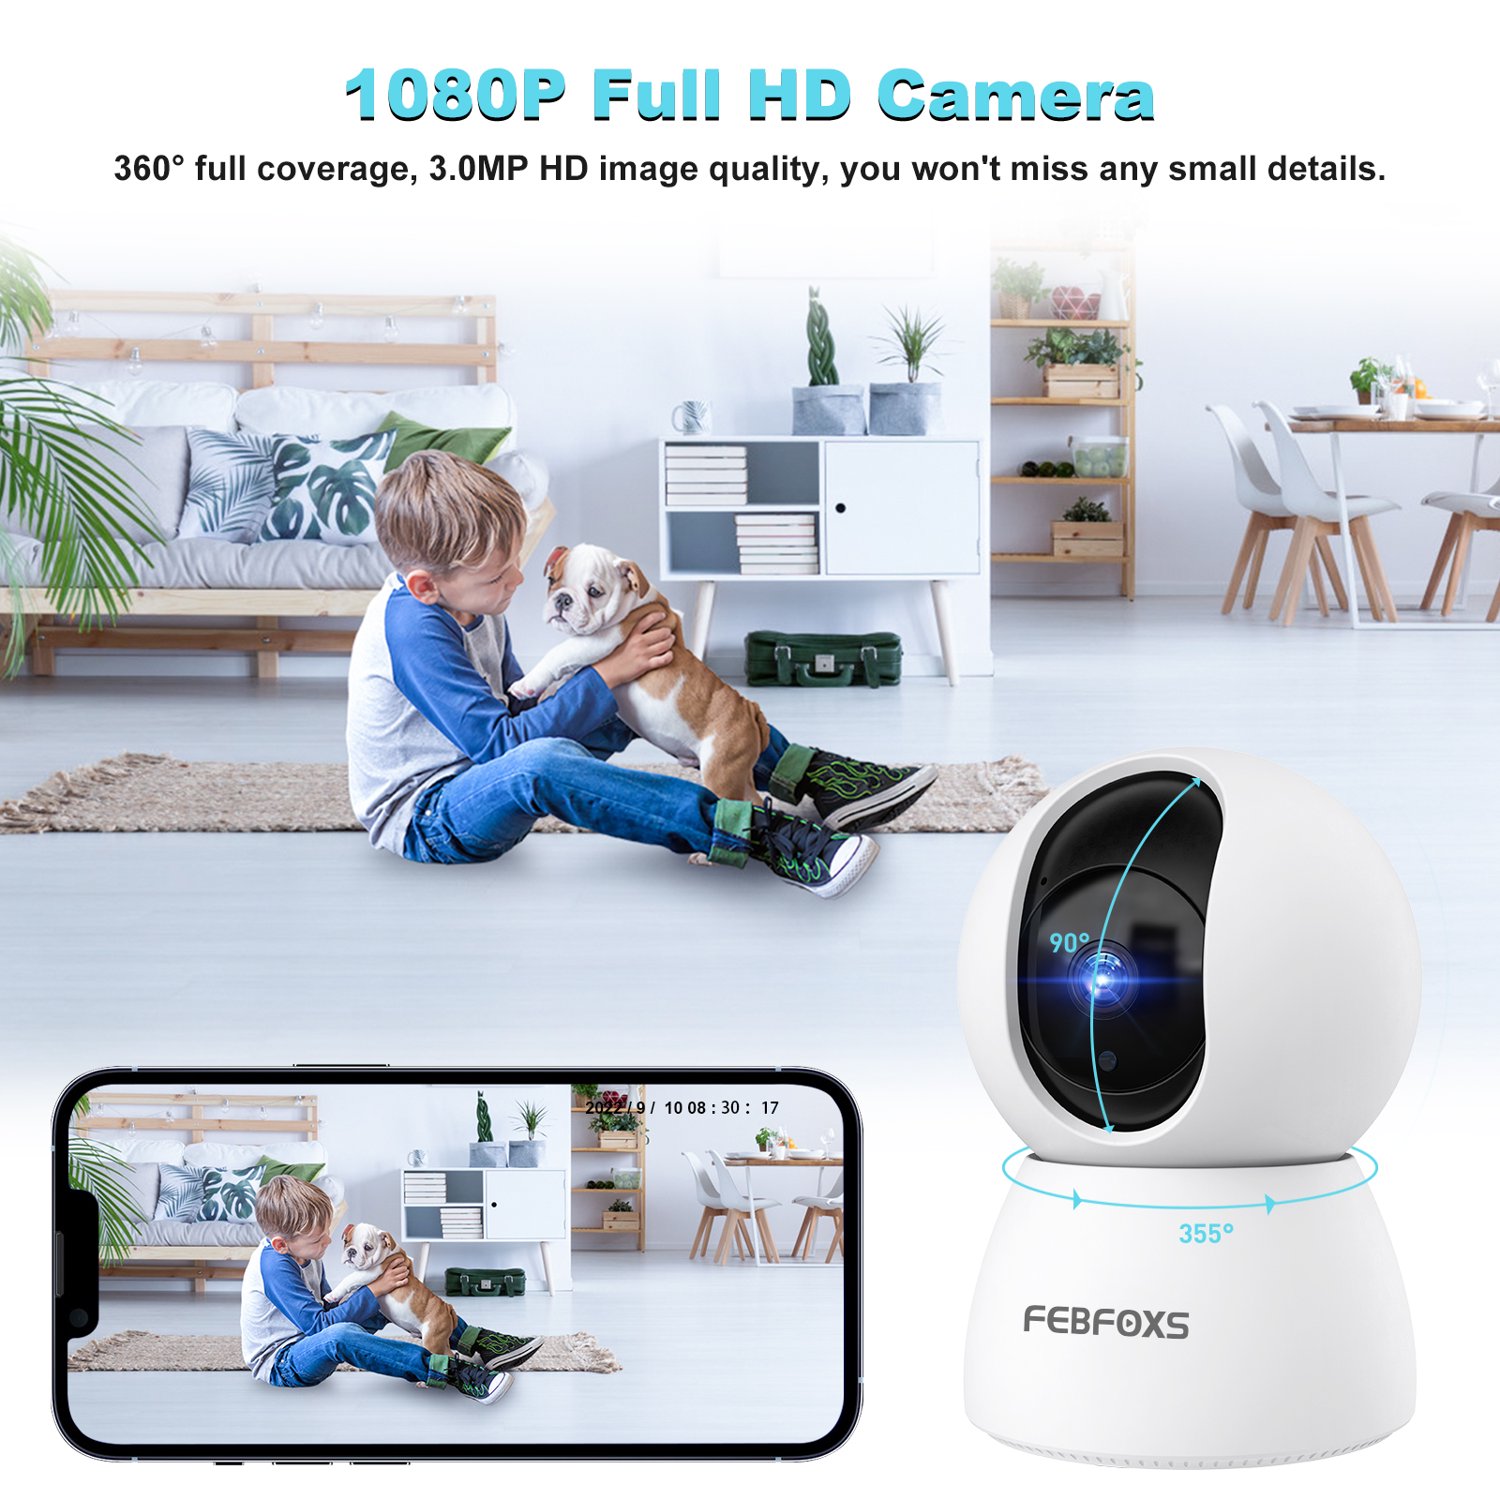 Febfoxs D305 Baby Monitor Security Camera for Home Security - image 3 of 7